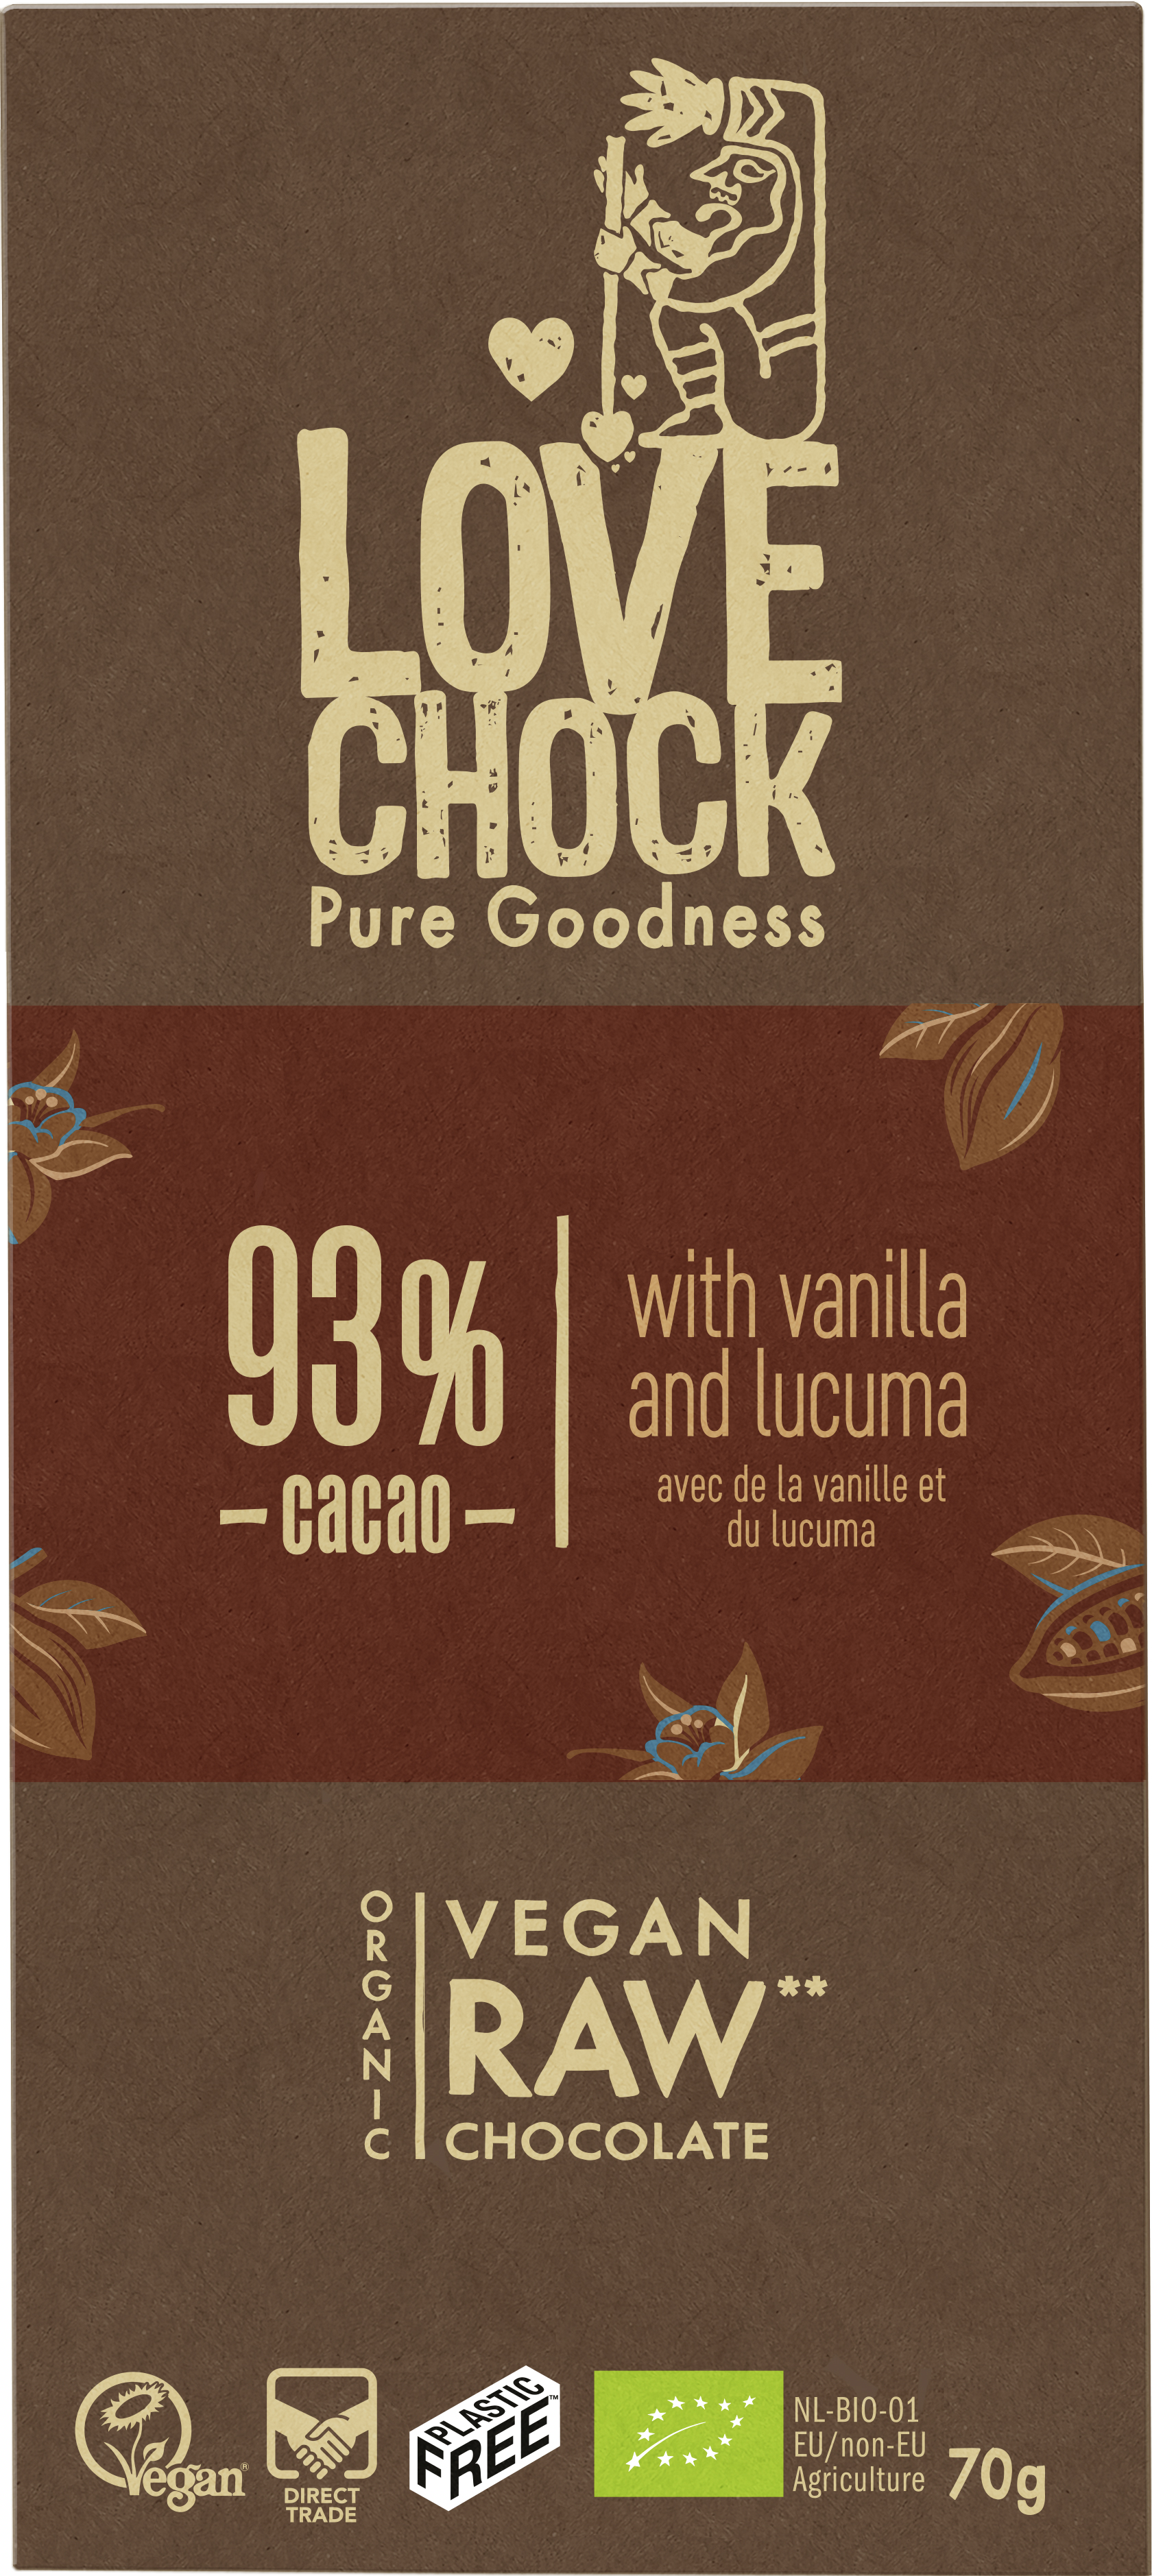 Lovechock 93% cacao tablet bio & raw 70g